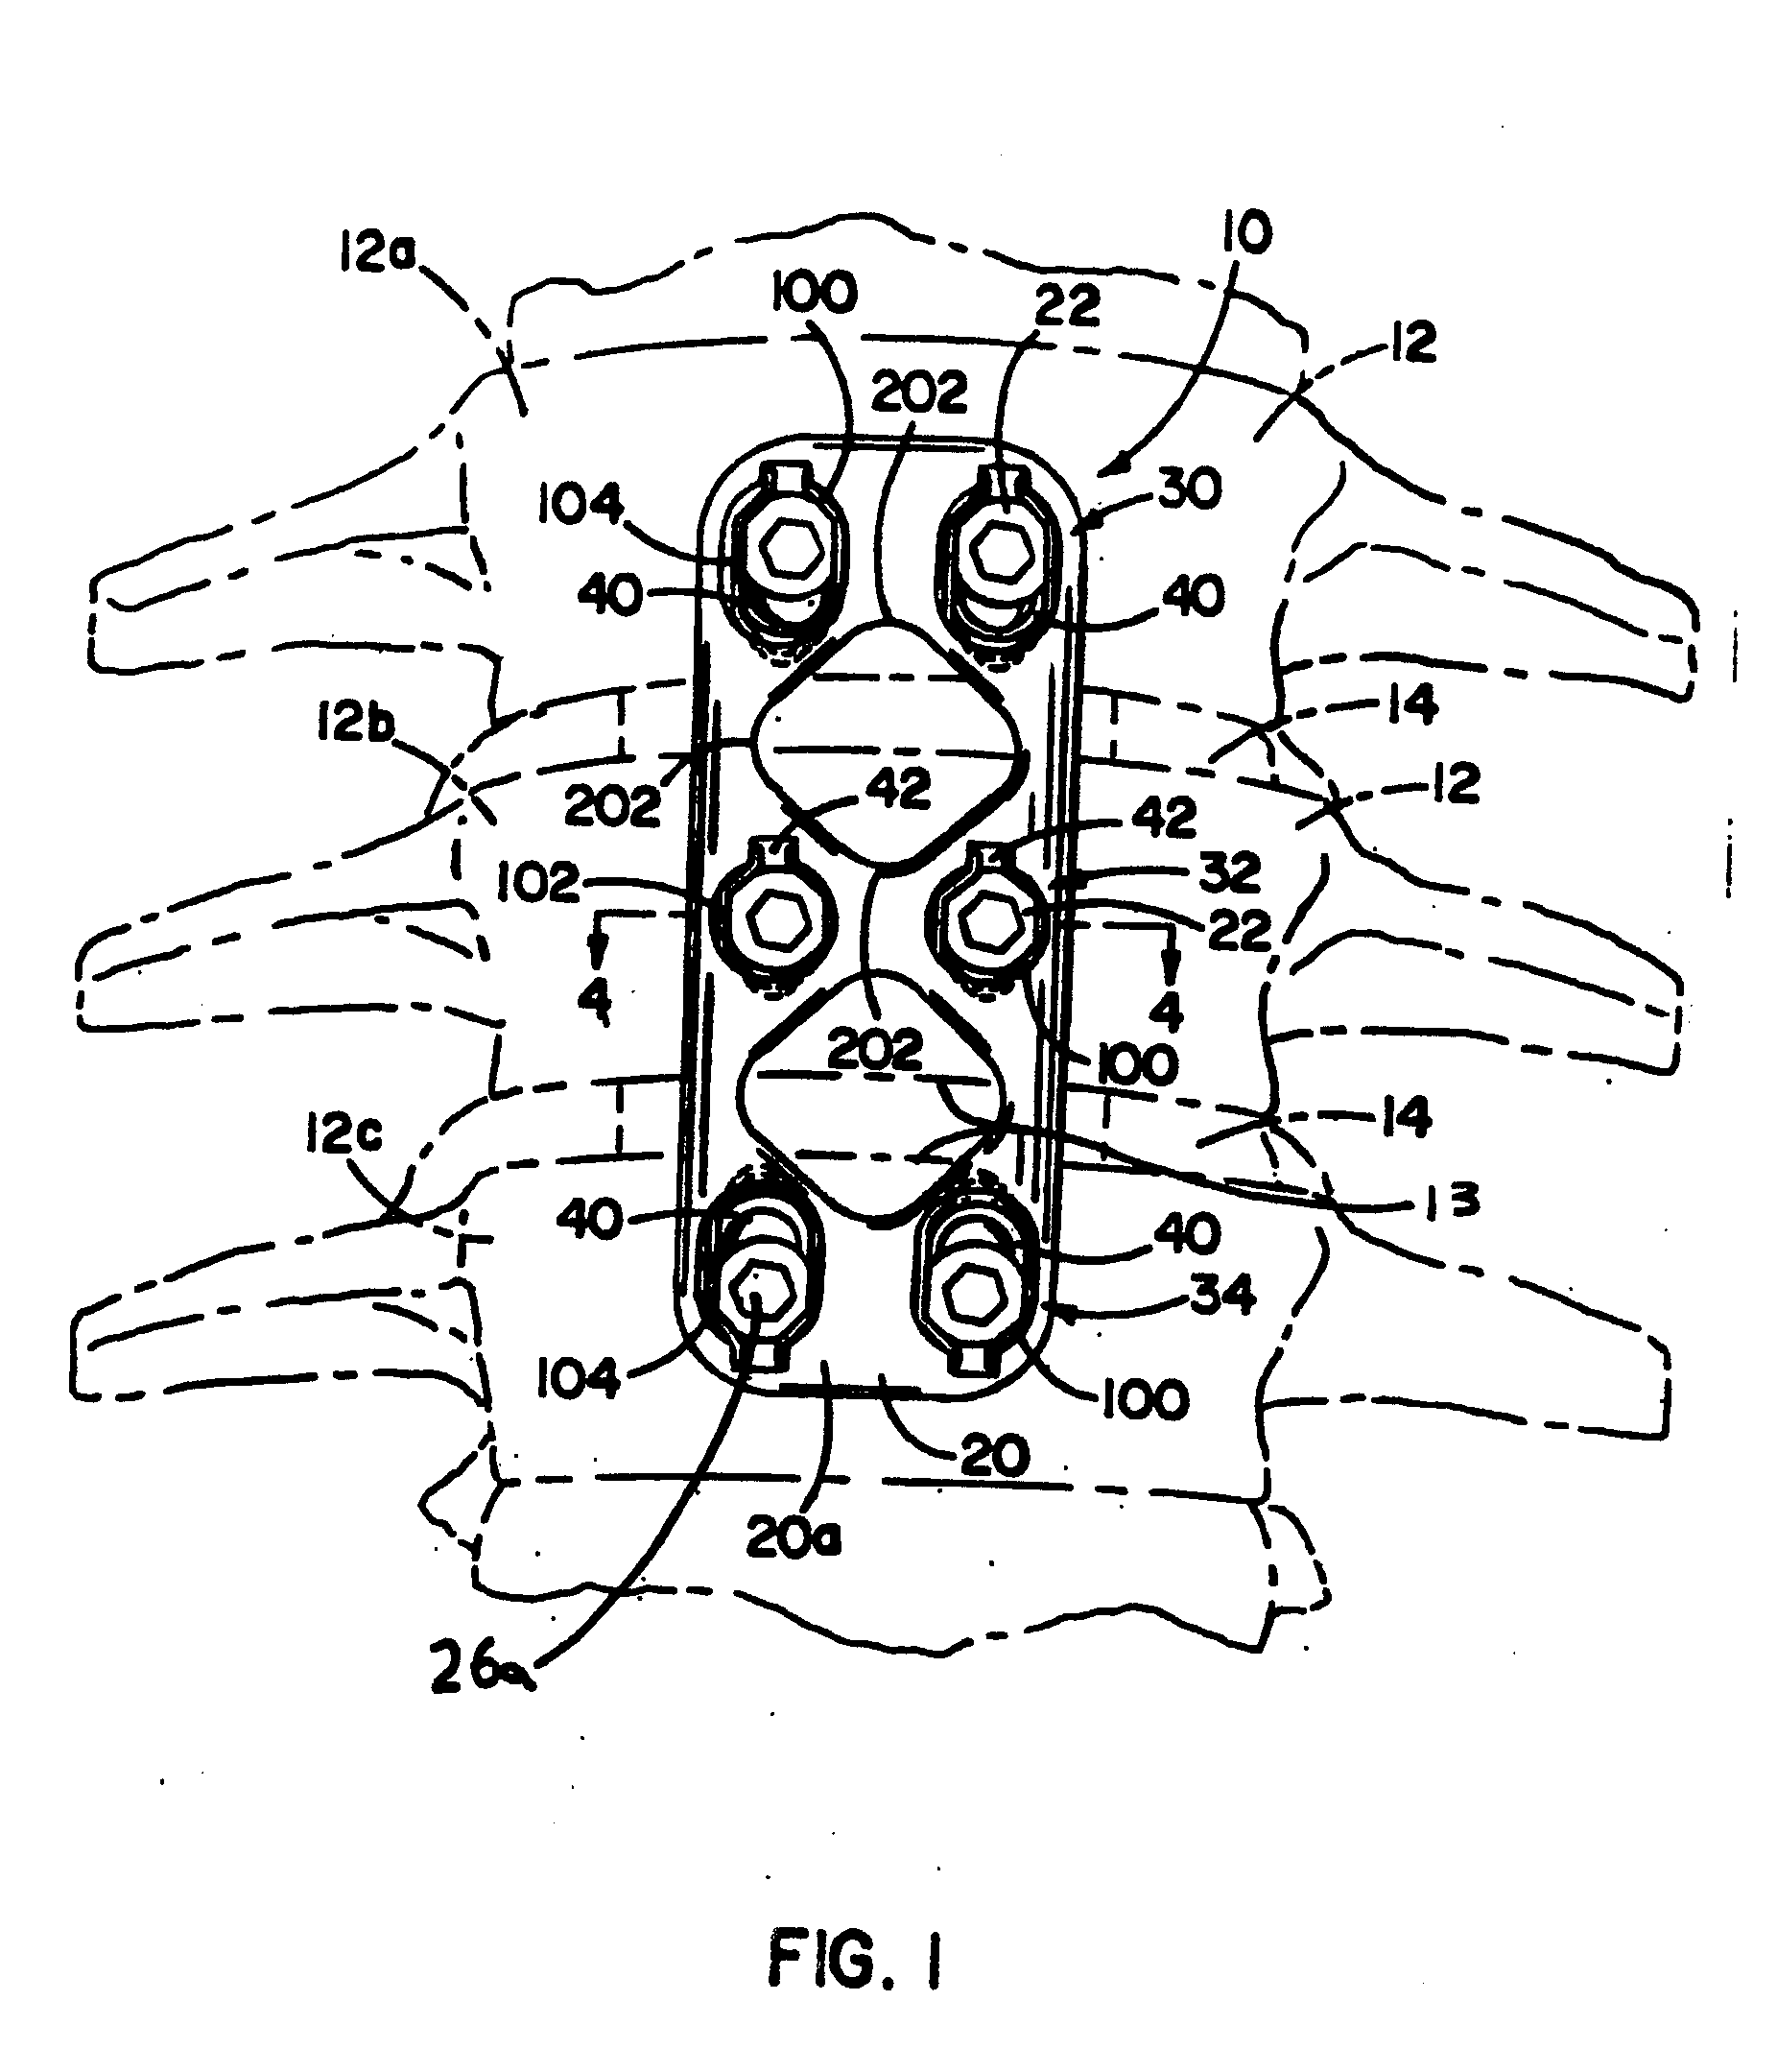 Bone plate system and methods